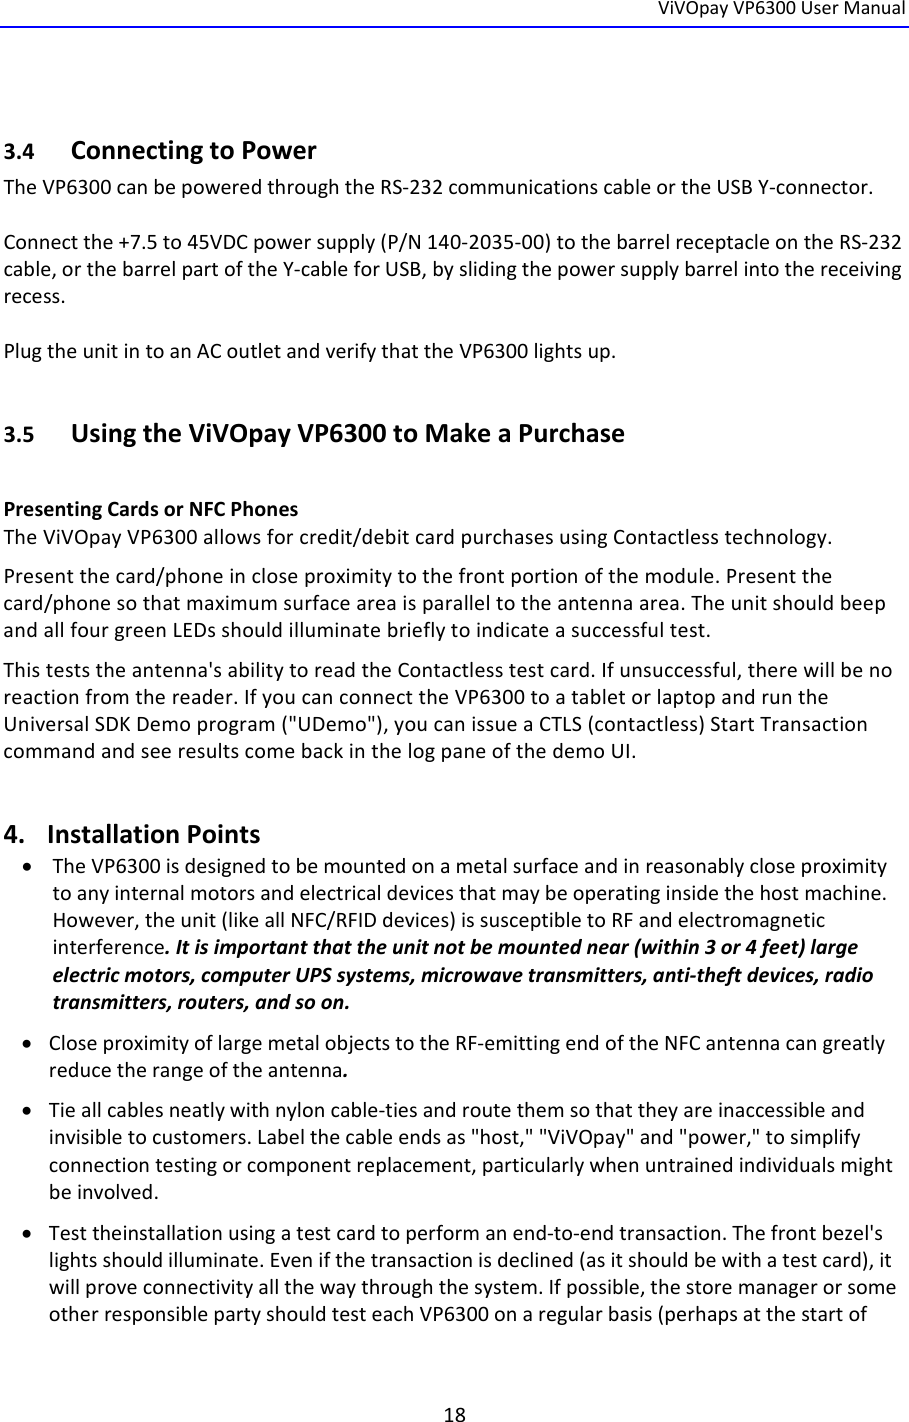  ViVOpayVP6300UserManual18  3.4 ConnectingtoPowerTheVP6300canbepoweredthroughtheRS‐232communicationscableortheUSBY‐connector.Connectthe+7.5to45VDCpowersupply(P/N140‐2035‐00)tothebarrelreceptacleontheRS‐232cable,orthebarrelpartoftheY‐cableforUSB,byslidingthepowersupplybarrelintothereceivingrecess.PlugtheunitintoanACoutletandverifythattheVP6300lightsup.3.5 UsingtheViVOpayVP6300toMakeaPurchasePresentingCardsorNFCPhonesTheViVOpayVP6300allowsforcredit/debitcardpurchasesusingContactlesstechnology.Presentthecard/phoneincloseproximitytothefrontportionofthemodule.Presentthecard/phonesothatmaximumsurfaceareaisparalleltotheantennaarea.TheunitshouldbeepandallfourgreenLEDsshouldilluminatebrieflytoindicateasuccessfultest.Thisteststheantenna&apos;sabilitytoreadtheContactlesstestcard.Ifunsuccessful,therewillbenoreactionfromthereader.IfyoucanconnecttheVP6300toatabletorlaptopandruntheUniversalSDKDemoprogram(&quot;UDemo&quot;),youcanissueaCTLS(contactless)StartTransactioncommandandseeresultscomebackinthelogpaneofthedemoUI.4. InstallationPoints TheVP6300isdesignedtobemountedonametalsurfaceandinreasonablycloseproximitytoanyinternalmotorsandelectricaldevicesthatmaybeoperatinginsidethehostmachine.However,theunit(likeallNFC/RFIDdevices)issusceptibletoRFandelectromagneticinterference.Itisimportantthattheunitnotbemountednear(within3or4feet)largeelectricmotors,computerUPSsystems,microwavetransmitters,anti‐theftdevices,radiotransmitters,routers,andsoon. CloseproximityoflargemetalobjectstotheRF‐emittingendoftheNFCantennacangreatlyreducetherangeoftheantenna. Tieallcablesneatlywithnyloncable‐tiesandroutethemsothattheyareinaccessibleandinvisibletocustomers.Labelthecableendsas&quot;host,&quot;&quot;ViVOpay&quot;and&quot;power,&quot;tosimplifyconnectiontestingorcomponentreplacement,particularlywhenuntrainedindividualsmightbeinvolved. Testtheinstallationusingatestcardtoperformanend‐to‐endtransaction.Thefrontbezel&apos;slightsshouldilluminate.Evenifthetransactionisdeclined(asitshouldbewithatestcard),itwillproveconnectivityallthewaythroughthesystem.Ifpossible,thestoremanagerorsomeotherresponsiblepartyshouldtesteachVP6300onaregularbasis(perhapsatthestartof